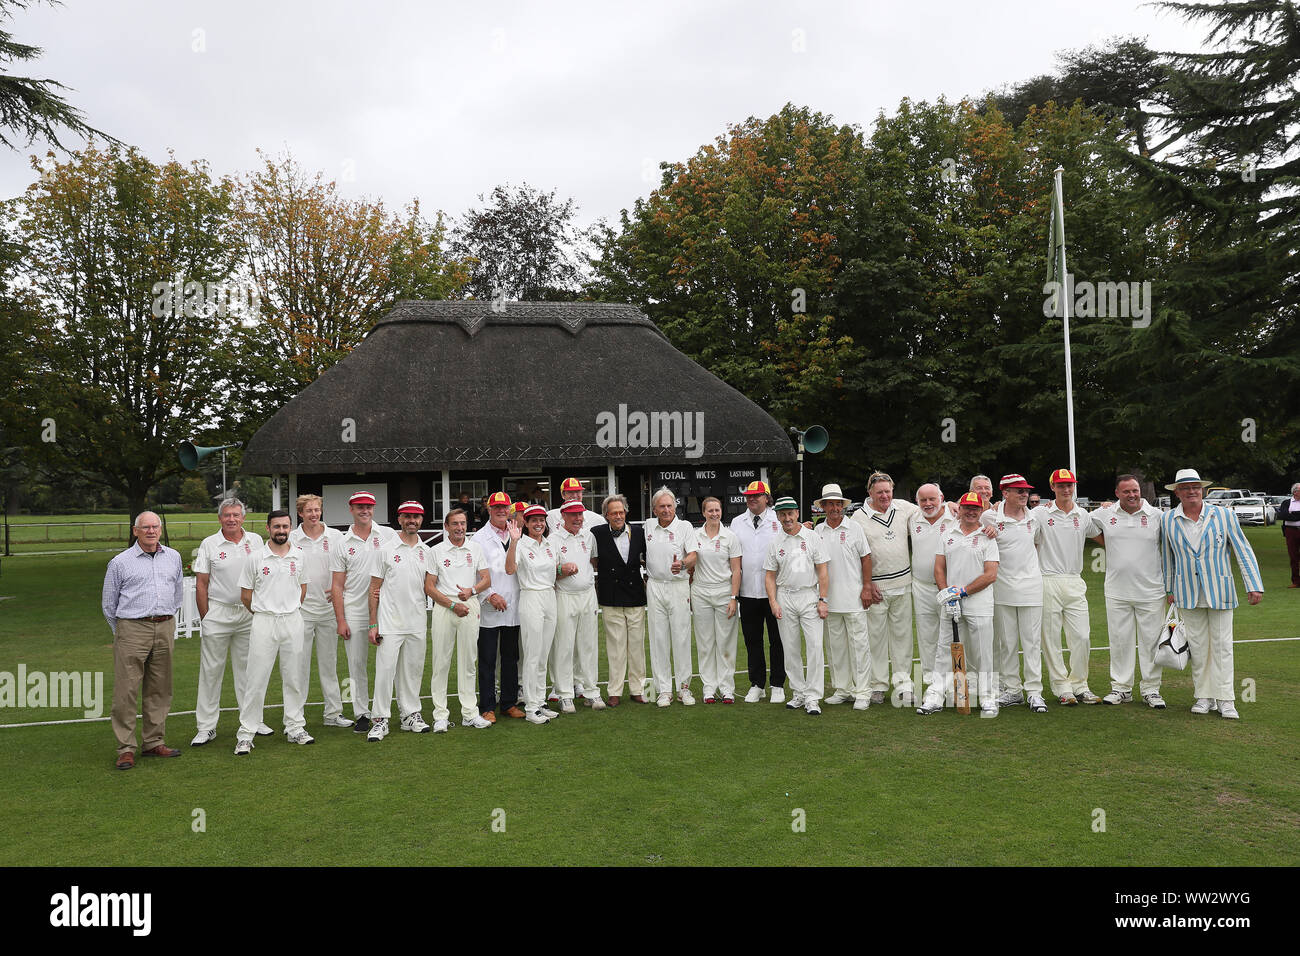 Goodwood, West Sussex, UK. 12th September 2019. The Goodwood Revival cricket matchs teams pose for a photo with the Duke of Richmond & Gordon. The teams include many famous drivers such as Derek Bell, Brendon Hartley, Stuart Graham and are called the Duke of Richmond & Gordon's XI and the Earl of March & Kinrara's XI at the Goodwood Revival in Goodwood, West Sussex, UK. © Malcolm Greig/Alamy Live News Stock Photo